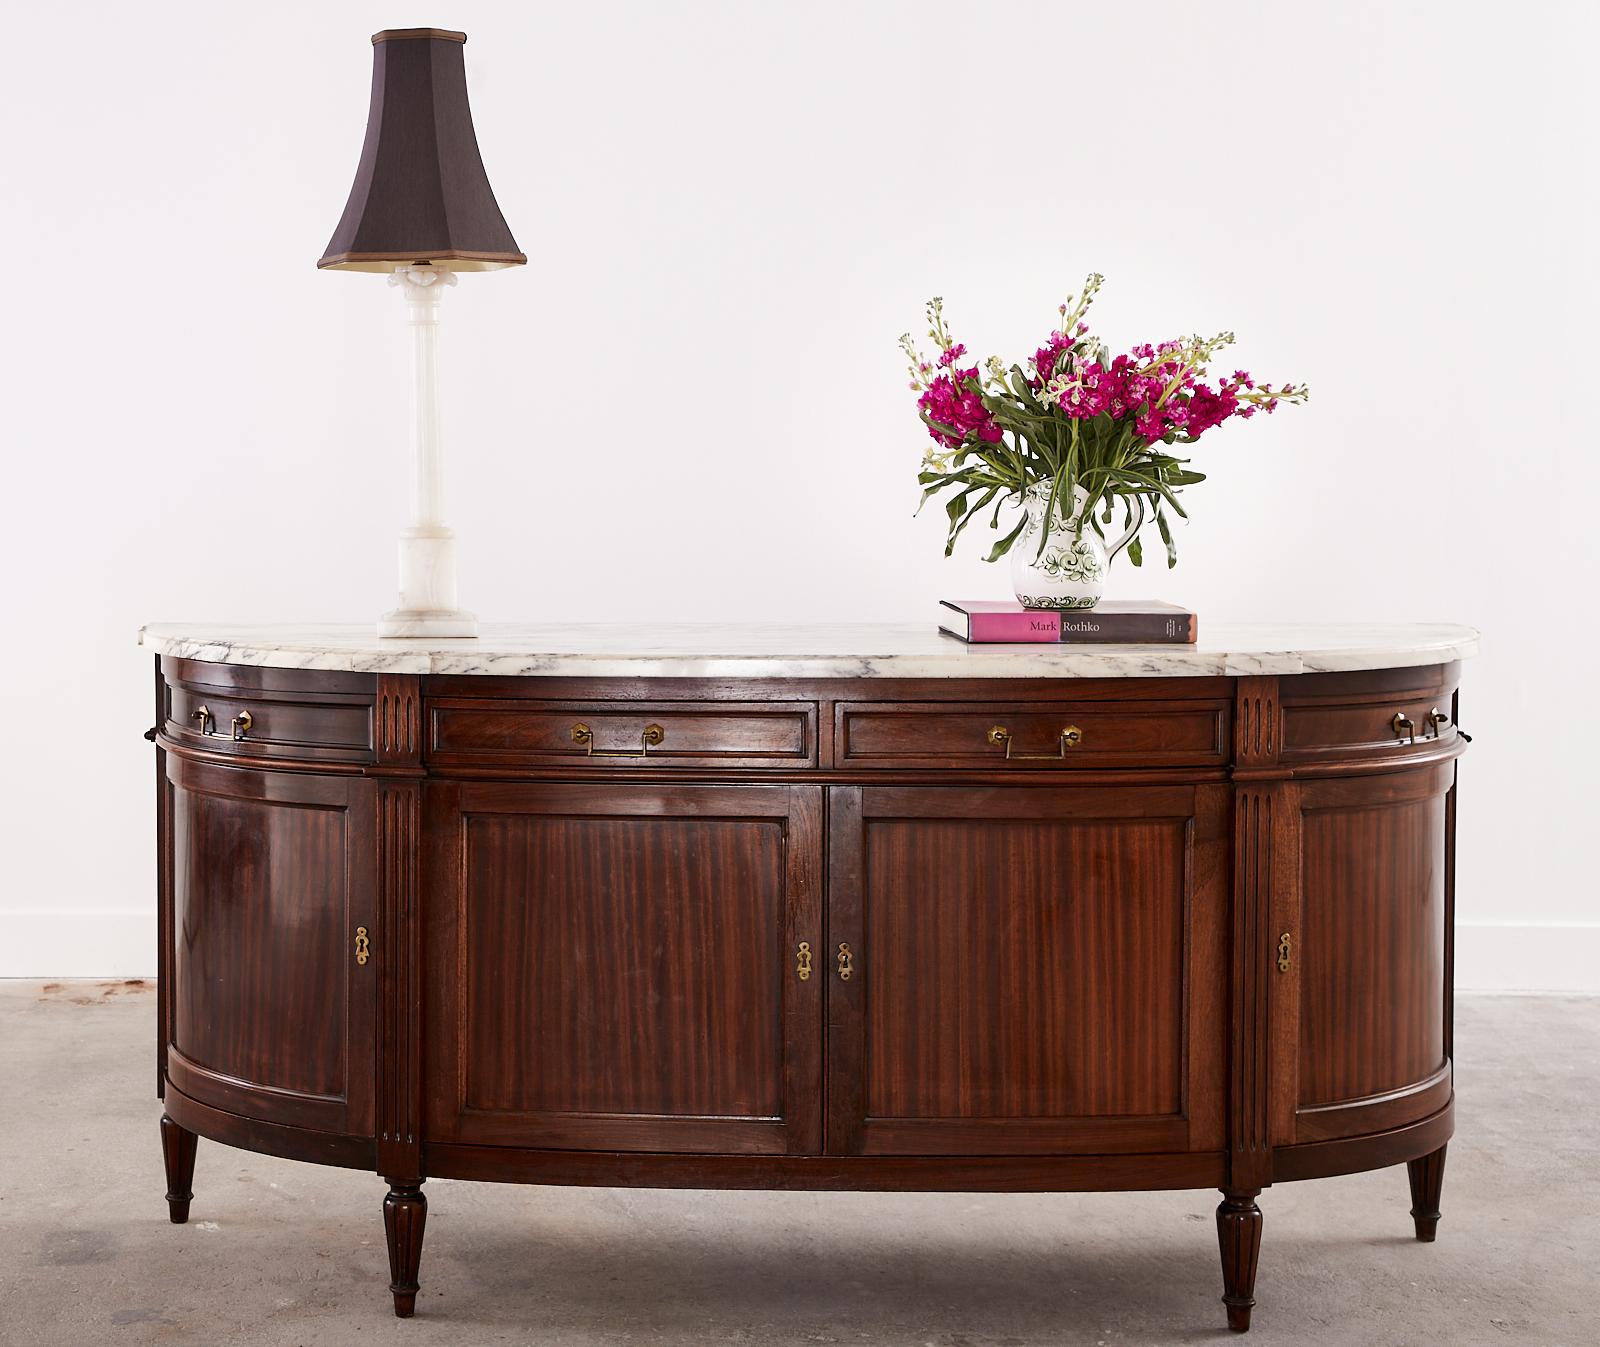 Classic French mahogany sideboard or buffet featuring a 1 inch thick Italian Carrara marble slab top. Beautifully crafted in the grand French Louis XVI taste. The case has gracefully curved demilune ends with reeded column pilasters on the front and